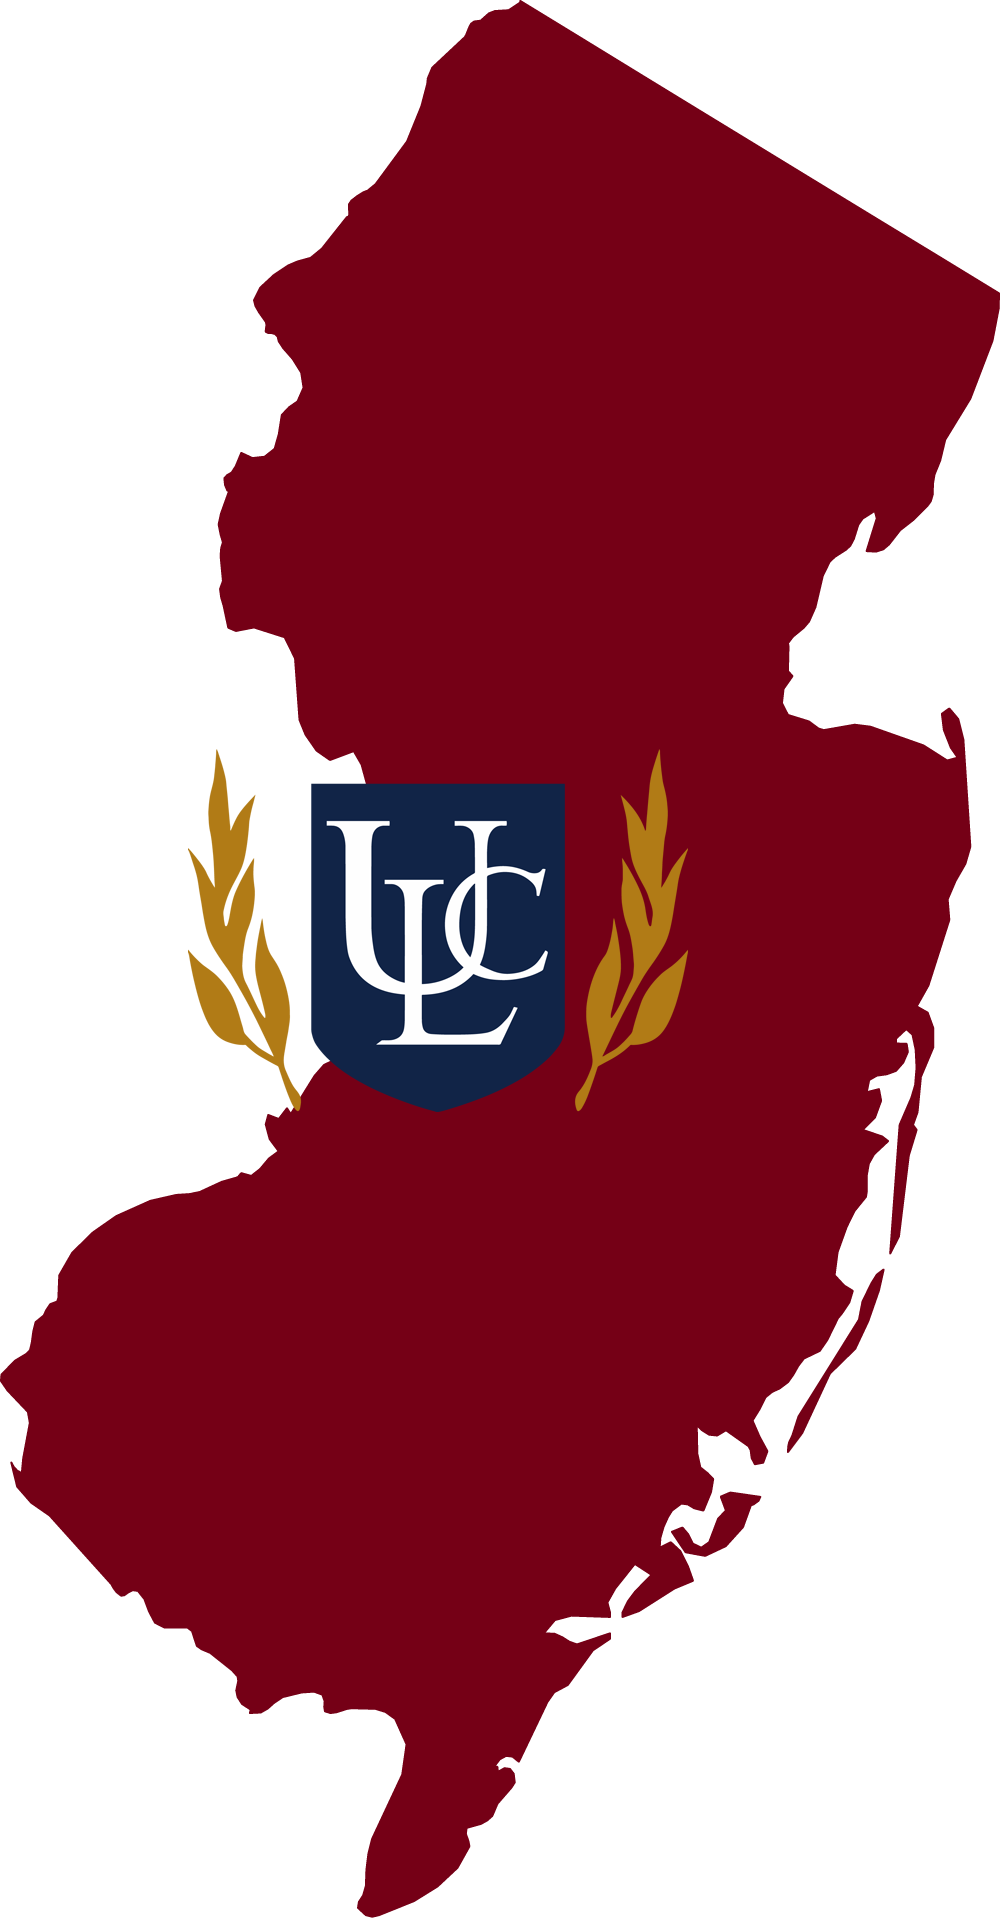 An outline of New Jersey with the ULC logo